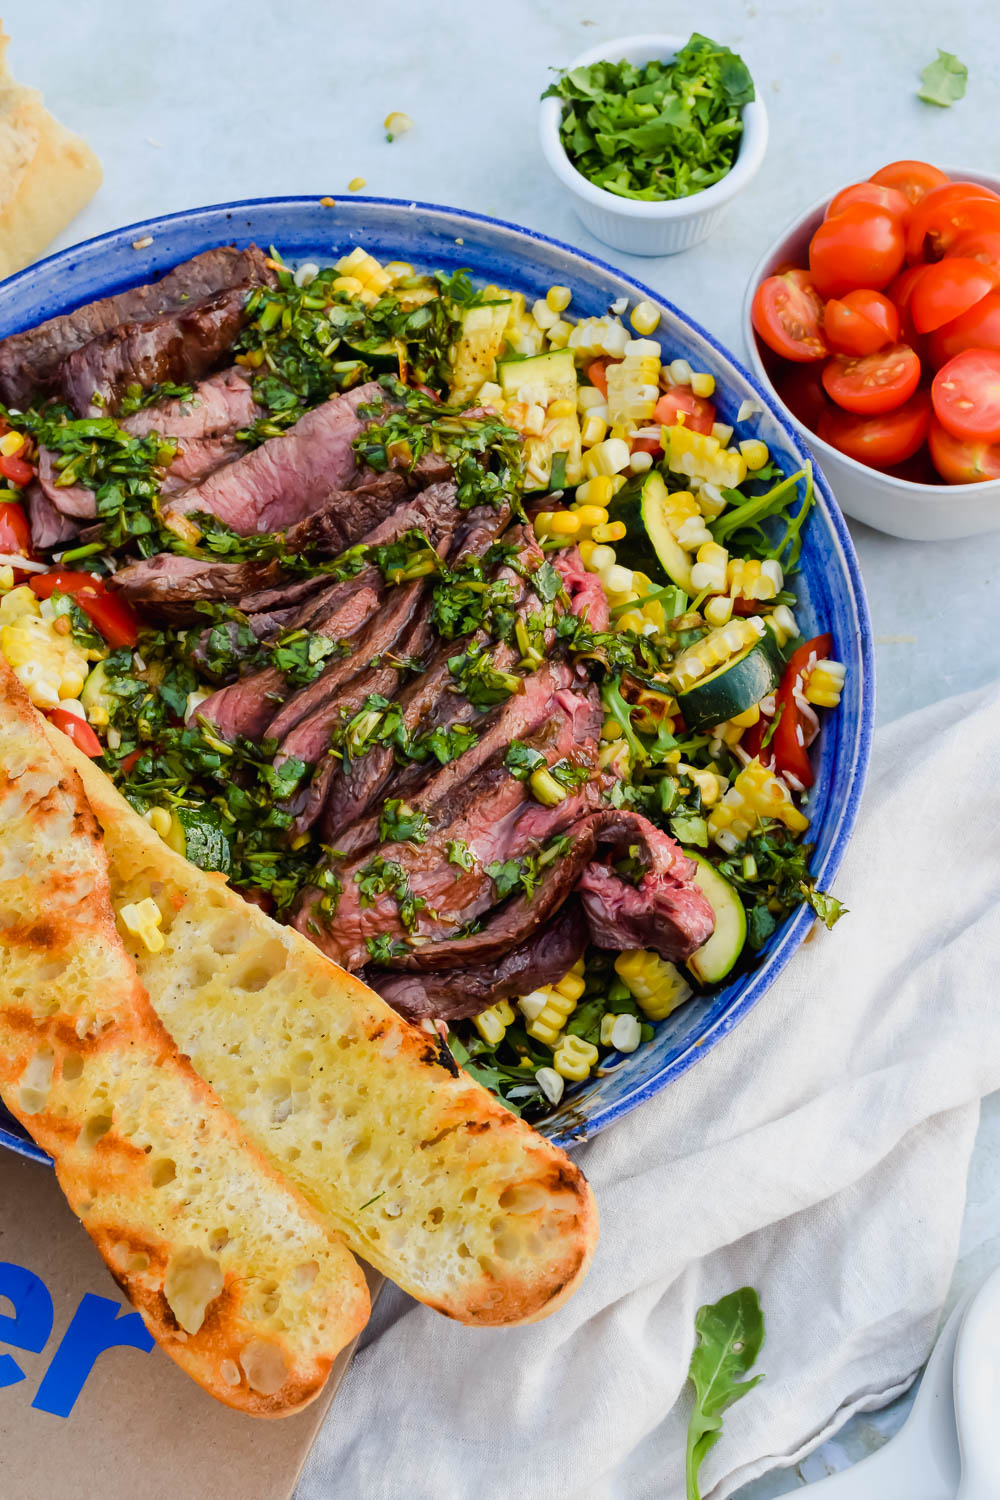 Grilled flank steak with chimichurri on top of a bed of grilled vegetables being tossed in a blue bowl with two halves of a grilled baguette on top of the salad beside a small bowl of halved cherry tomatoes and another bowl of fresh herbs.